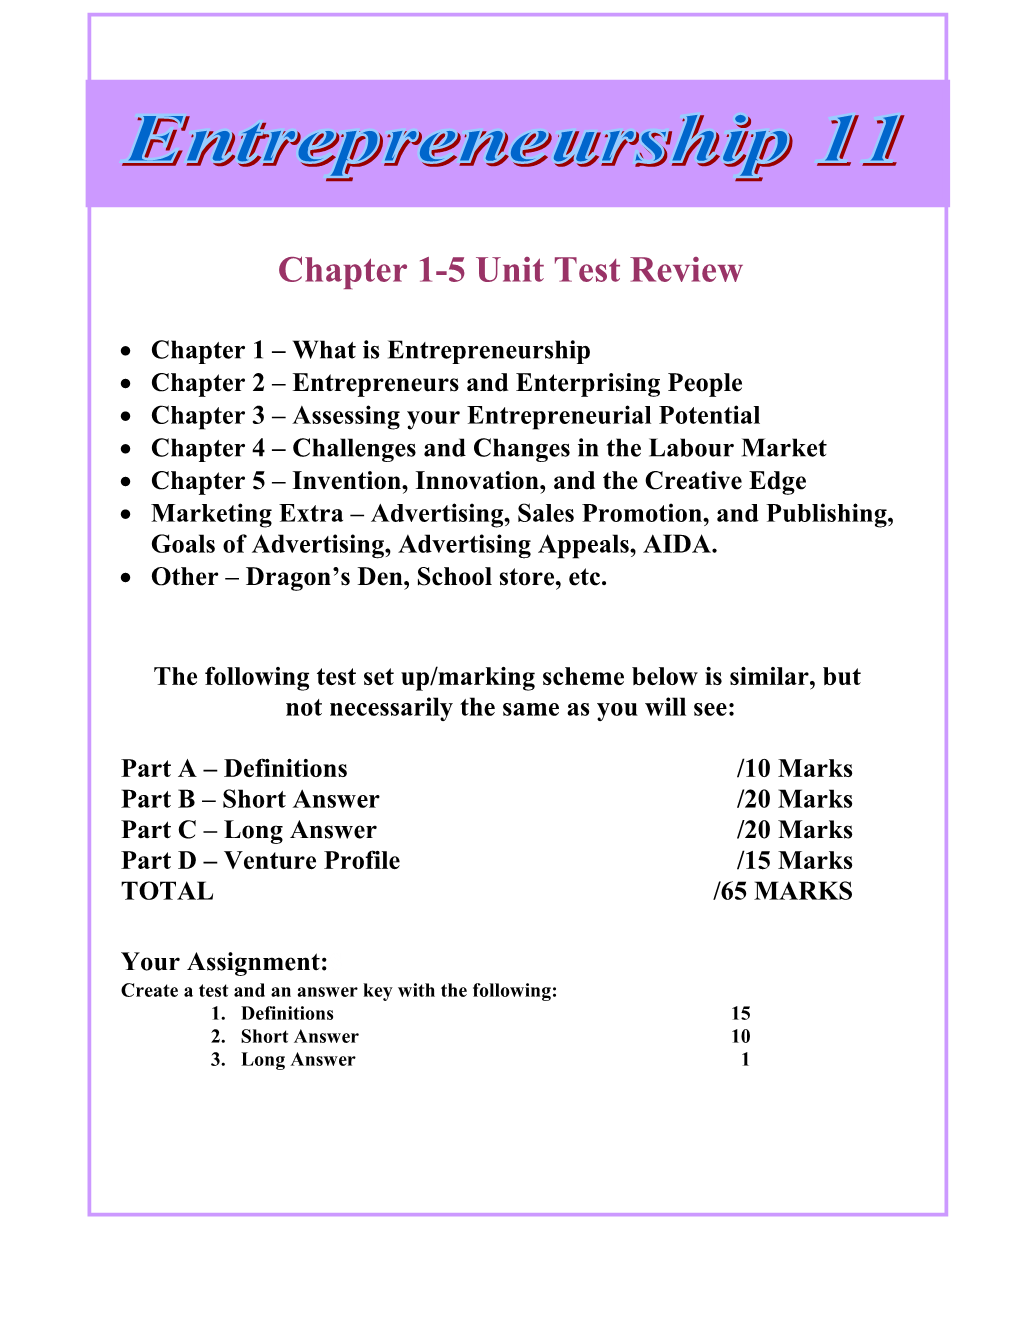 Chapter 1-5 Unit Test Review